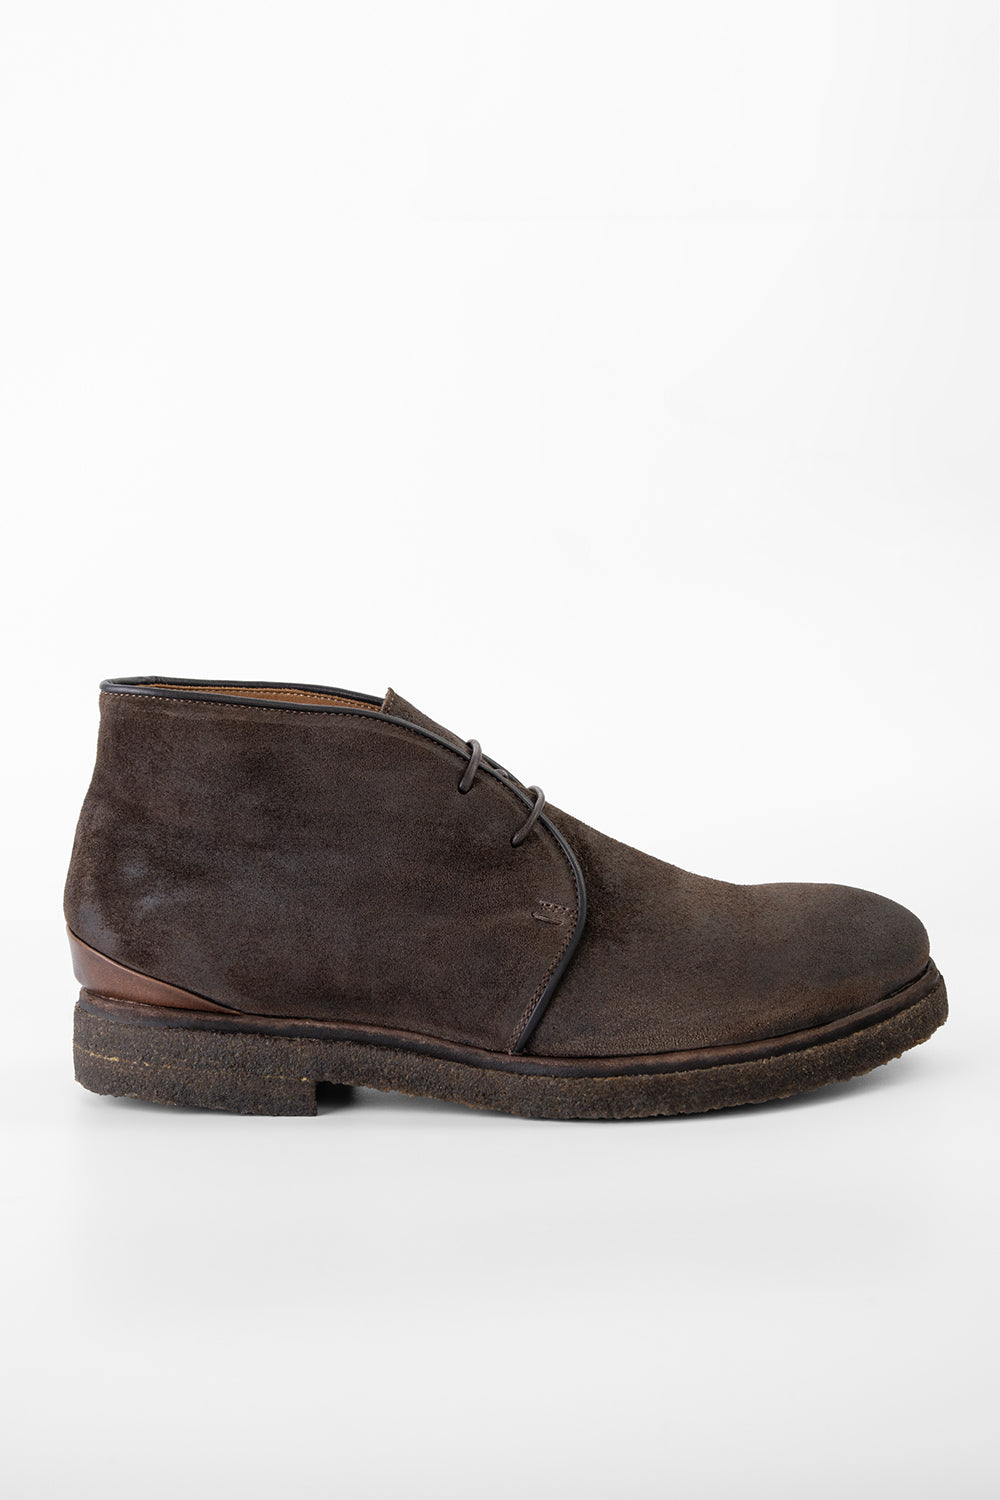 BROMPTON rich-cocoa ankle boots | untamed street | men – UNTAMED STREET